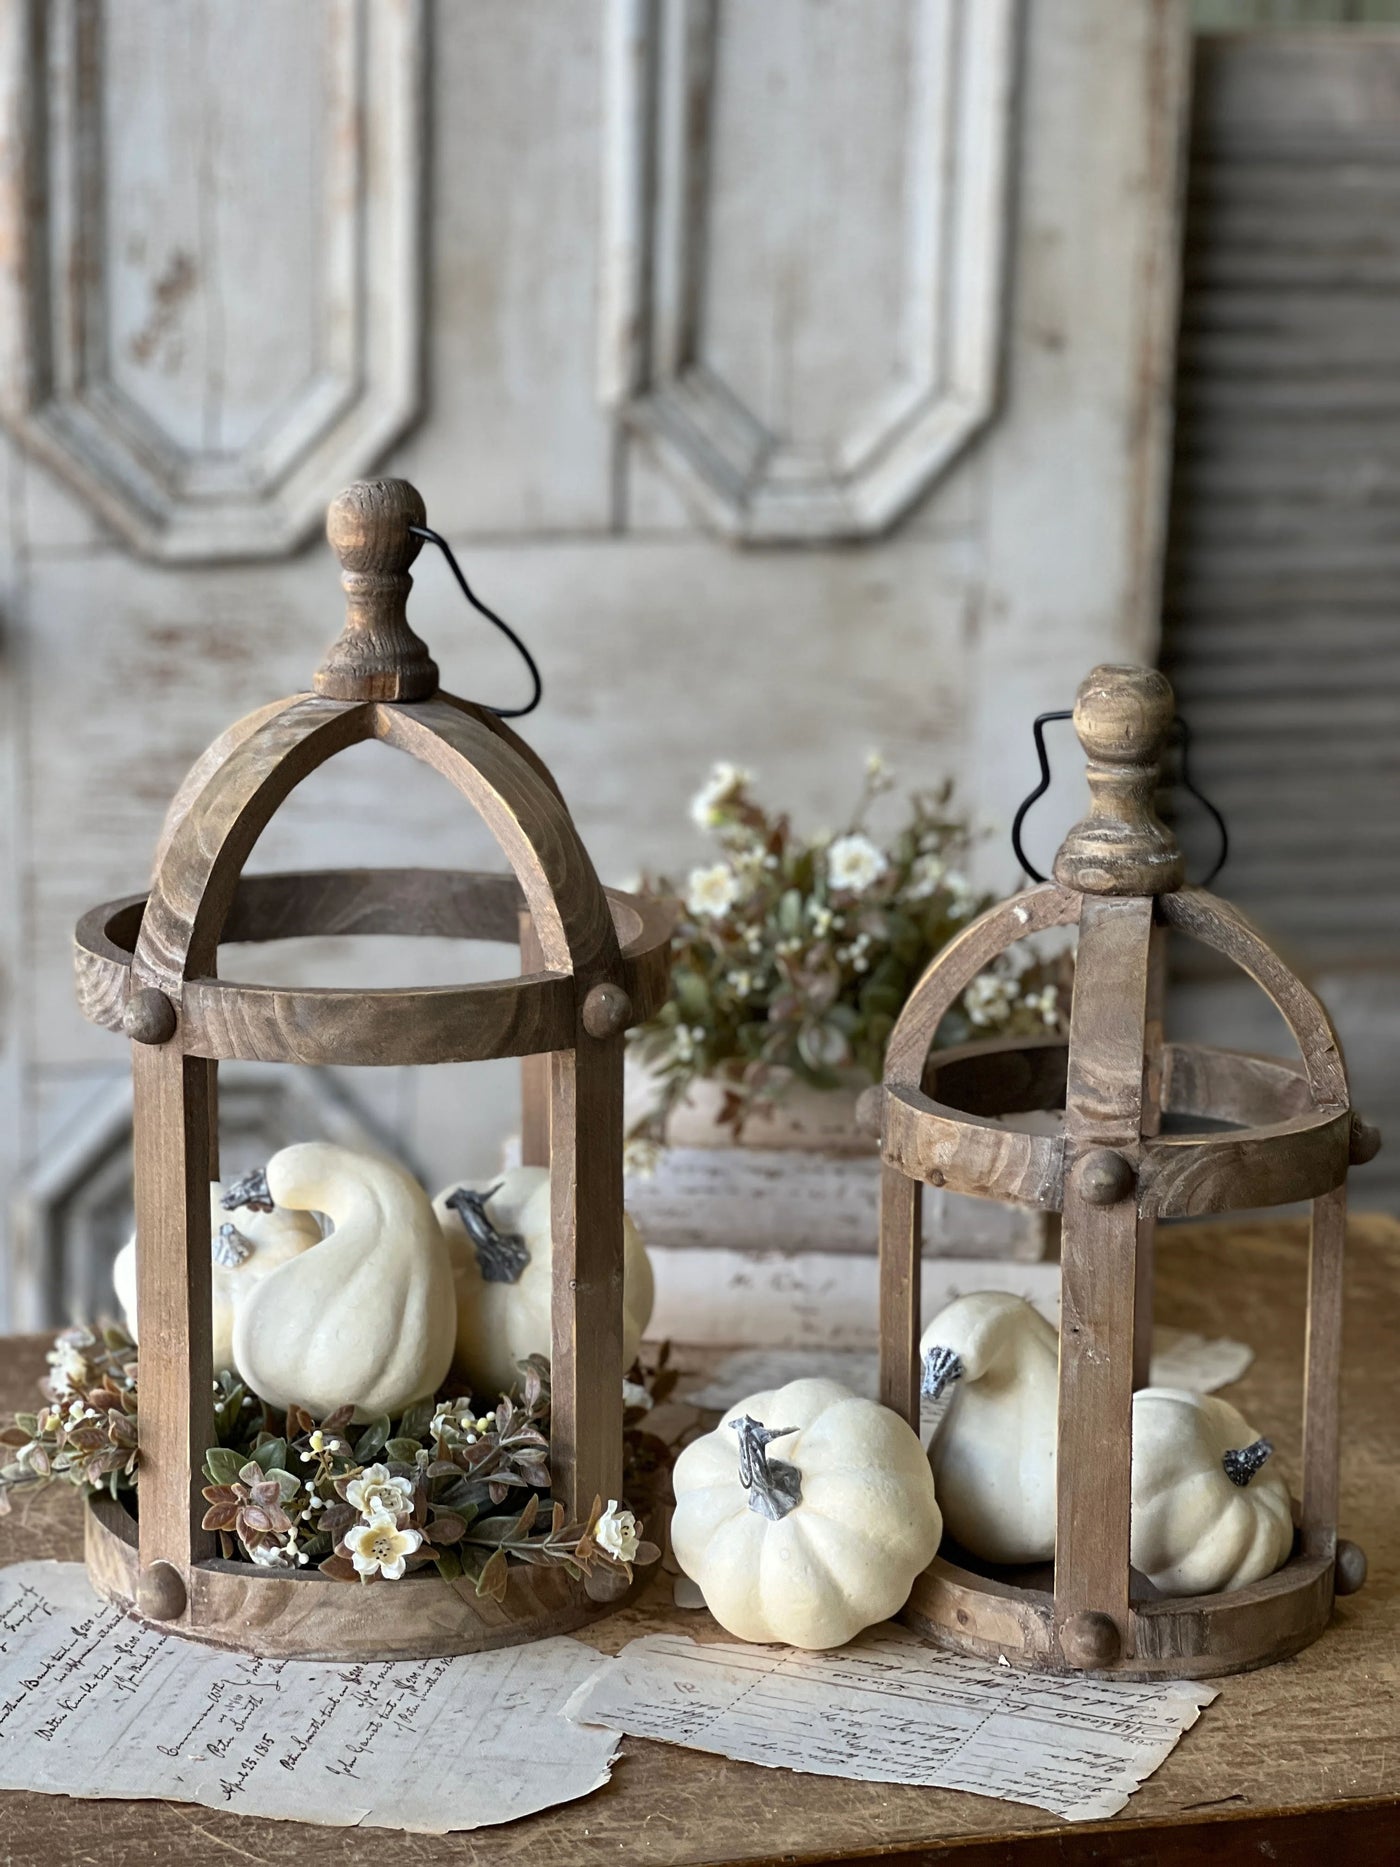 Set of 6 Falls Folly White Pumpkins and Gourds